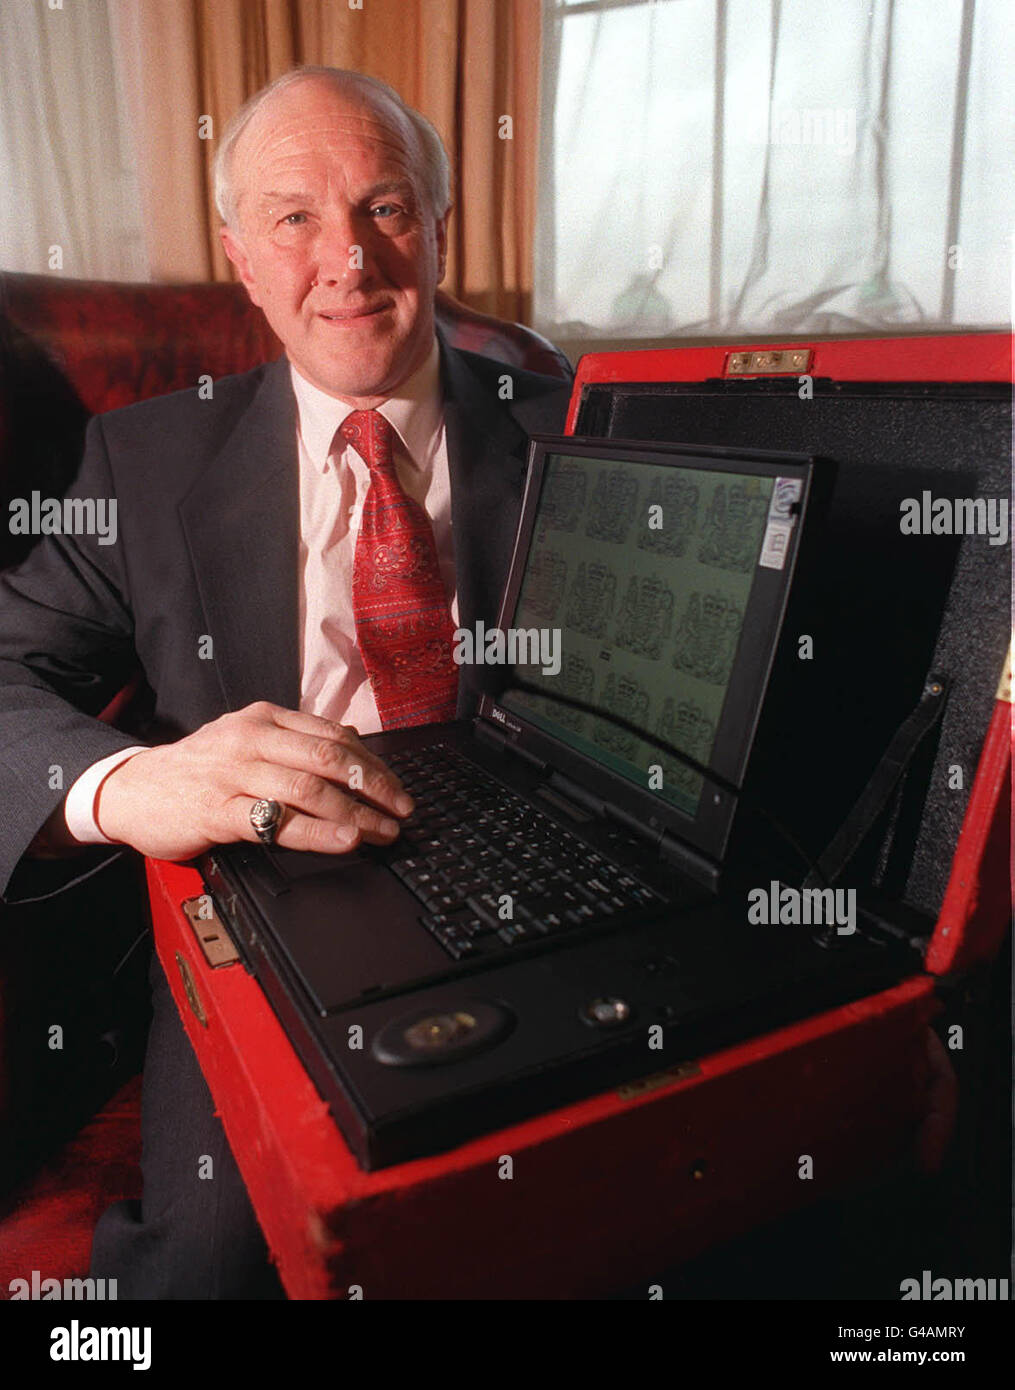 **Embargoed until TUESDAY 13/1/98** David Clarke, Chancellor of the Duchy of Lancaster, shows off the new ministerial red box which has security features based on fingerprints and a ring that the owner wears.  Photo by Ben Curtis/PA. Stock Photo